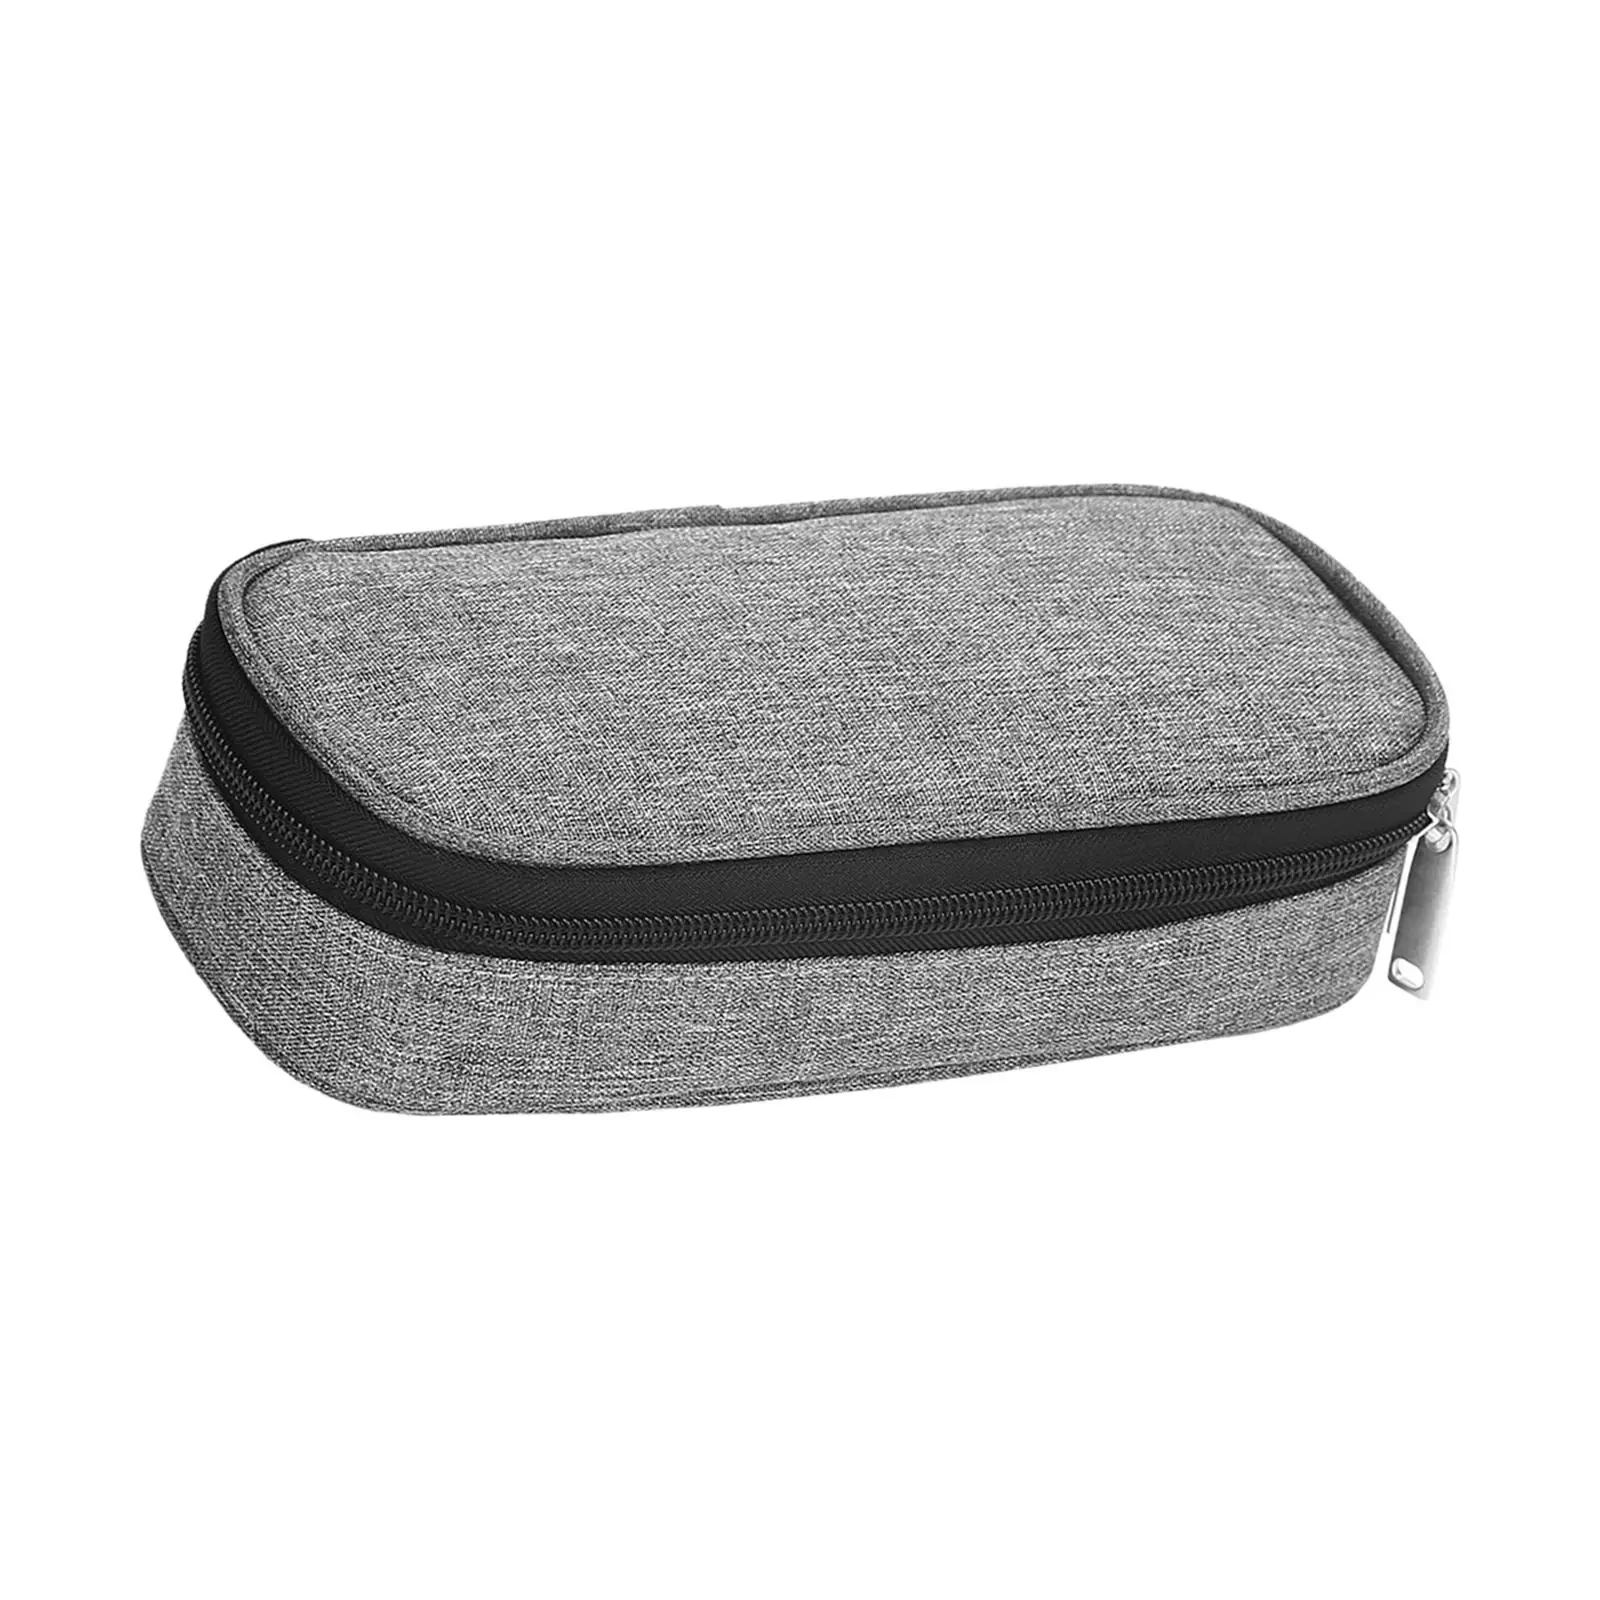 Medical Cooler Bag Portable Keep Cool Convenient Small Ice Pack Protector Carrying Bag Insulation Storage Bag Mini Isolated Pack